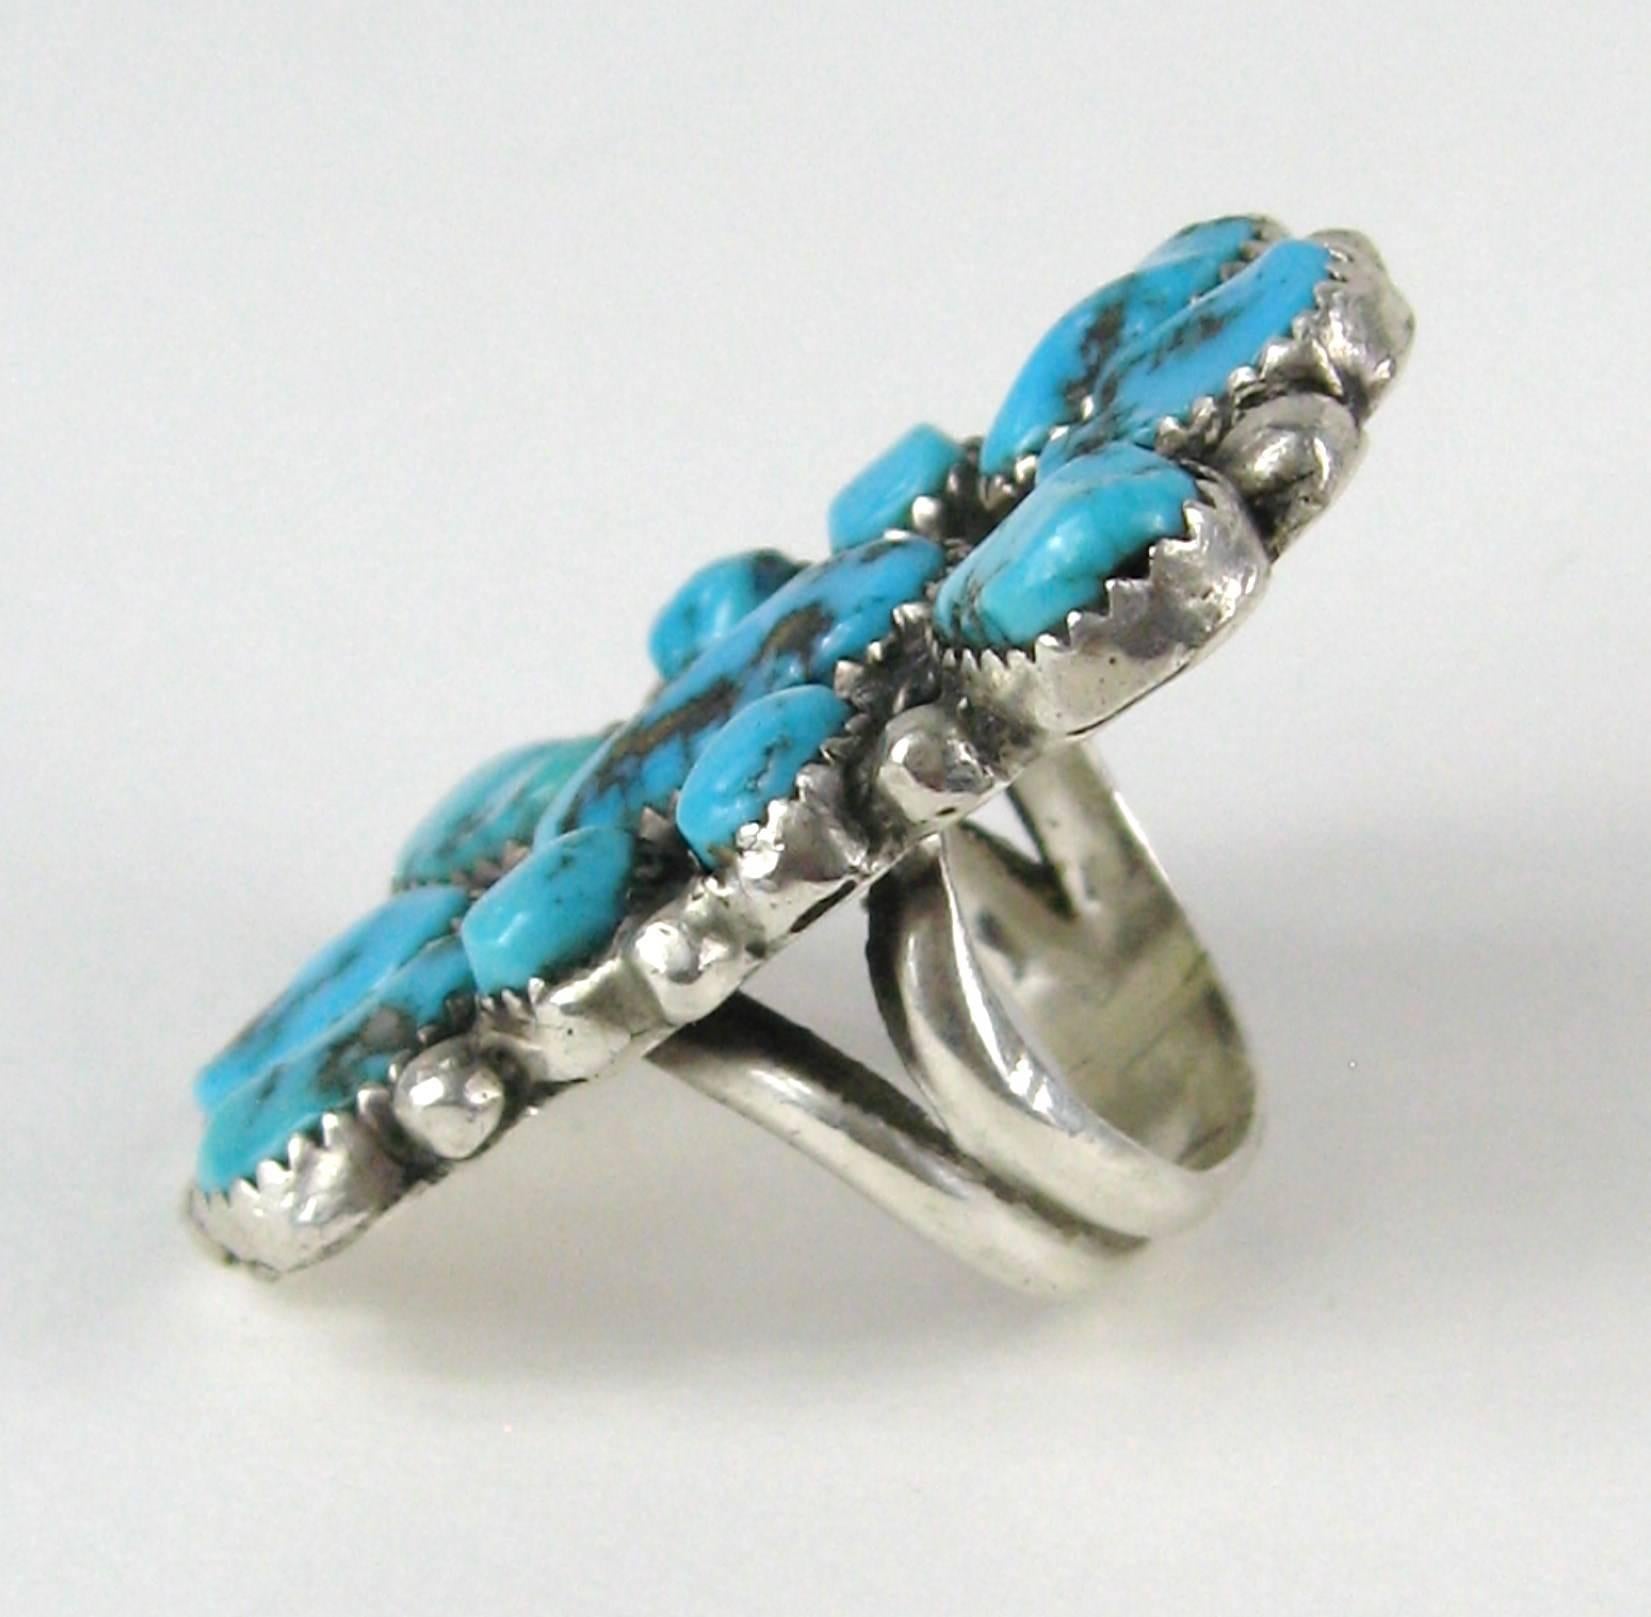 This is massive in size with Nuggets of Turquoise set in Sterling Silver. It is Hallmarked inside Ring. Measuring 1.75 in top to bottom x 1.12 in wide. It is a Size 4.25. This is out of a massive collection of Hopi, Zuni, Navajo, Southwestern and